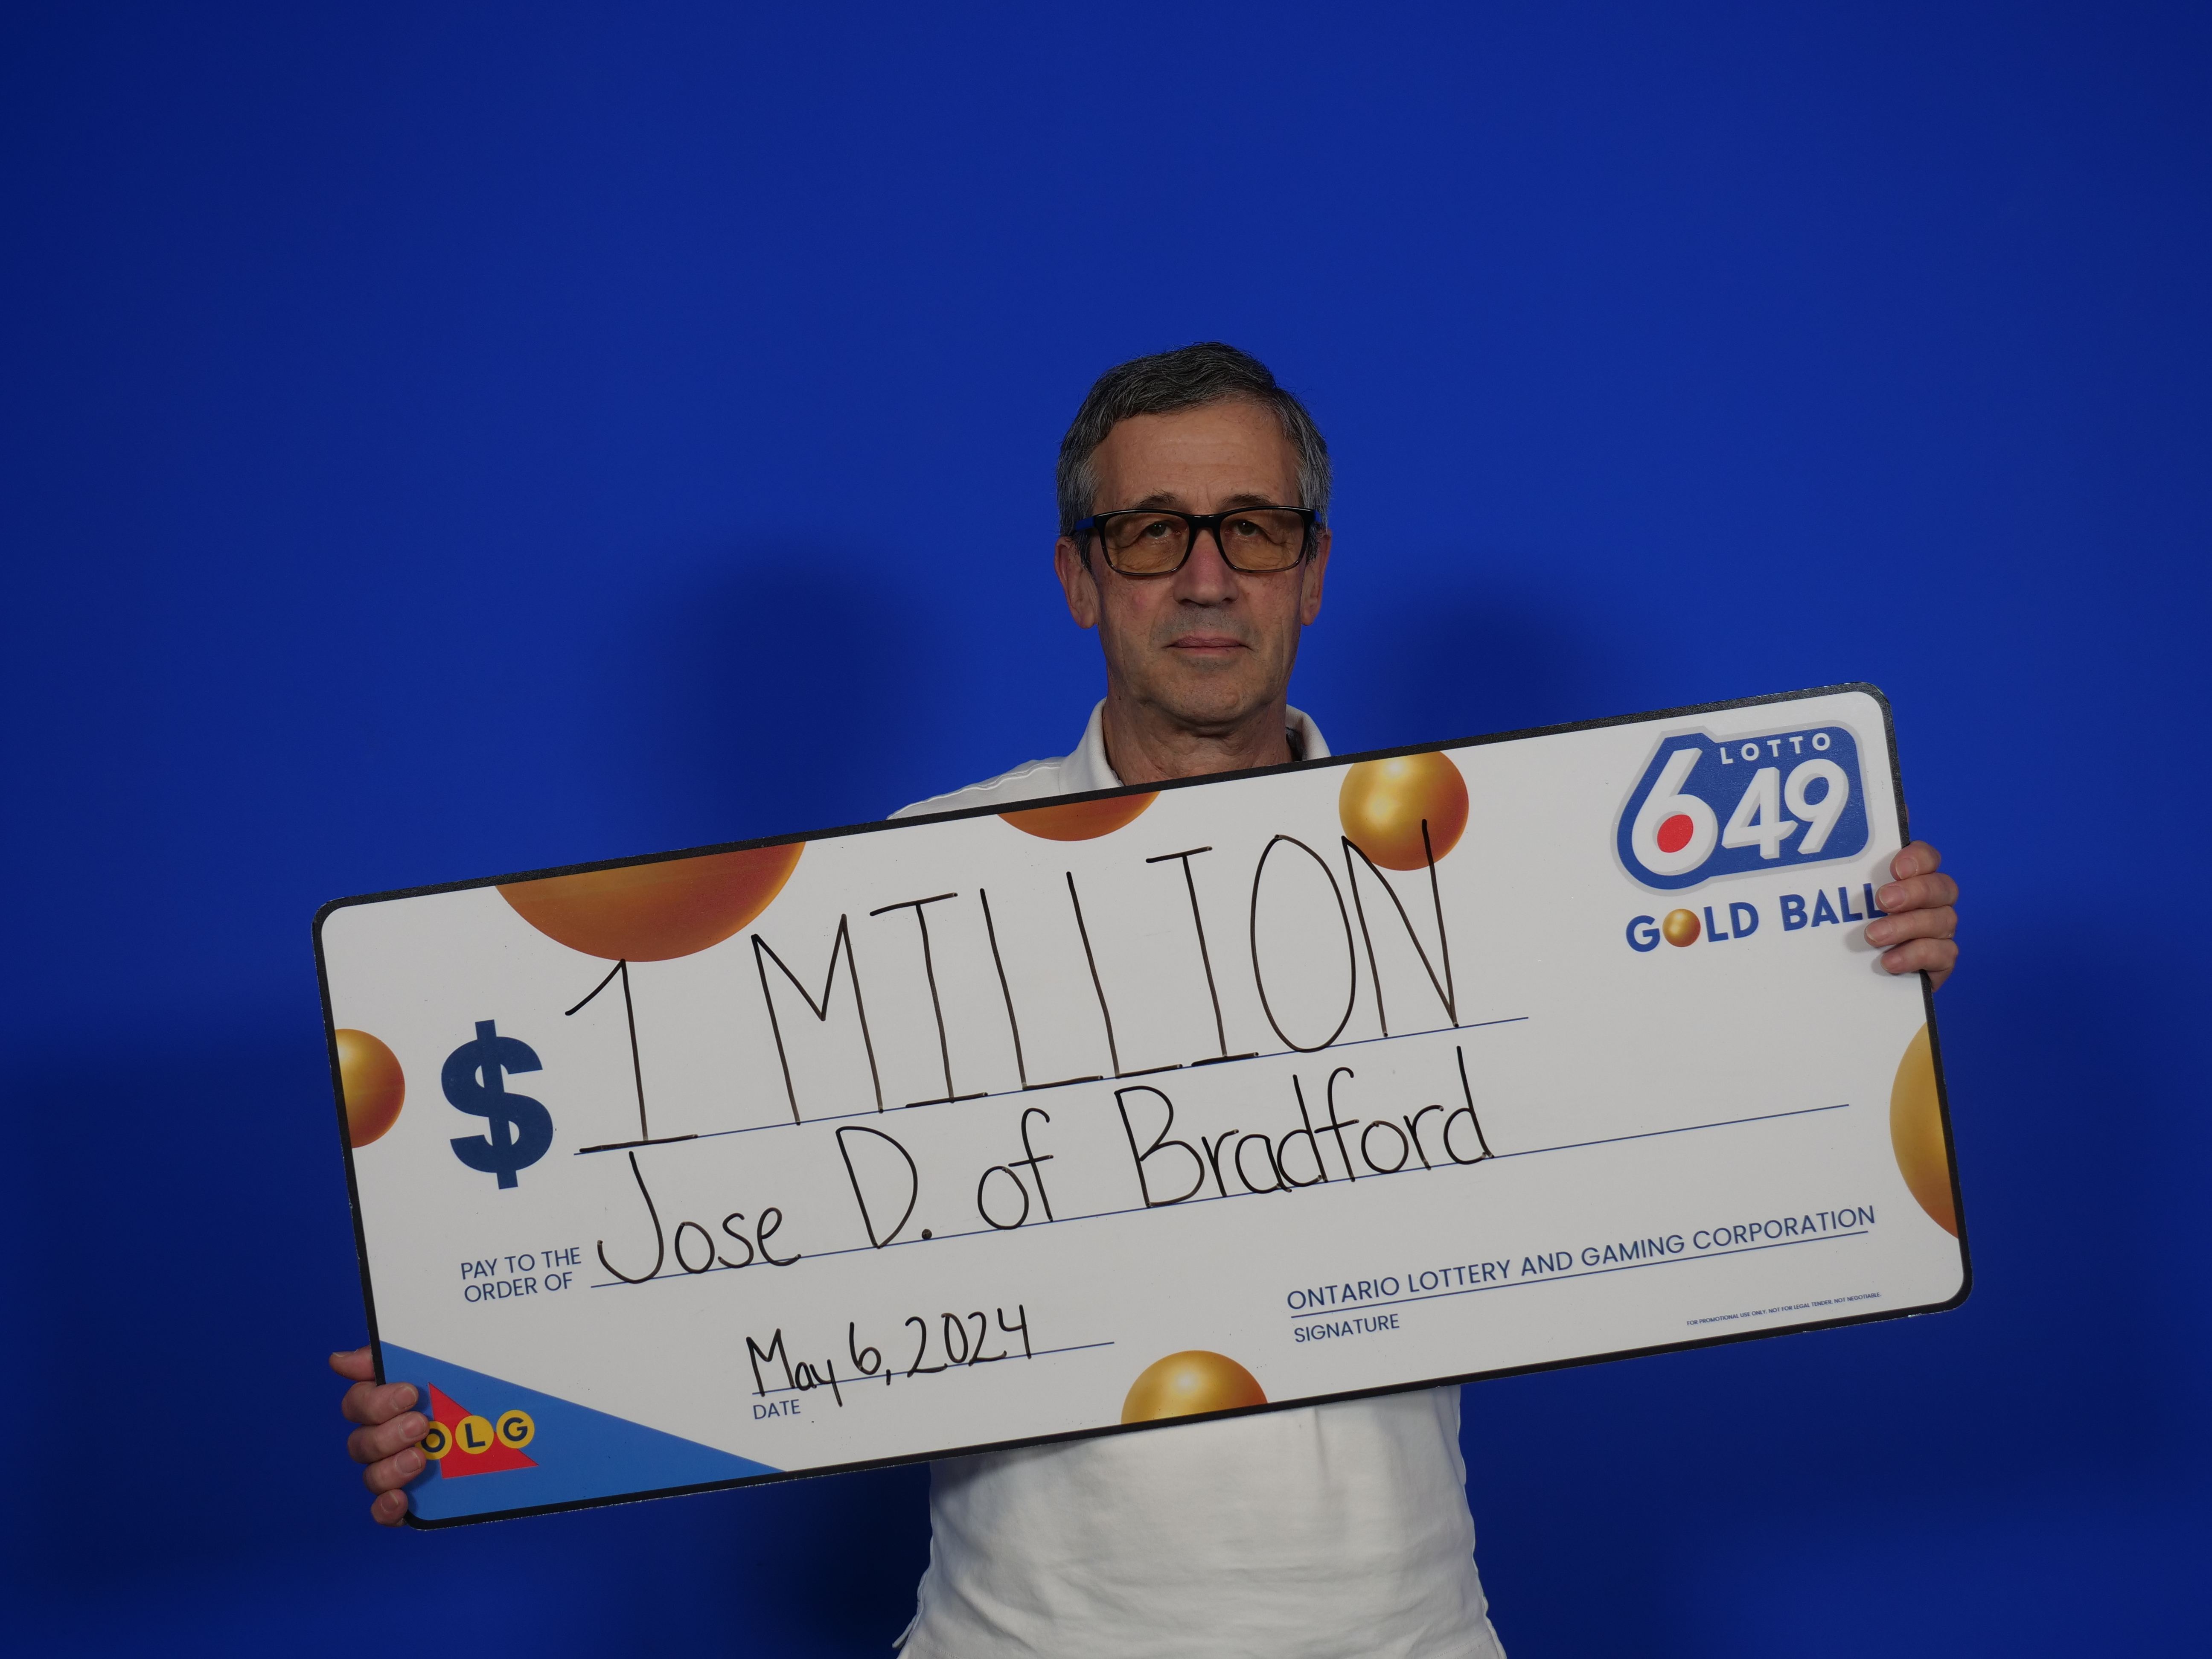 Retired construction worker wins $1 million playing lucky numbers